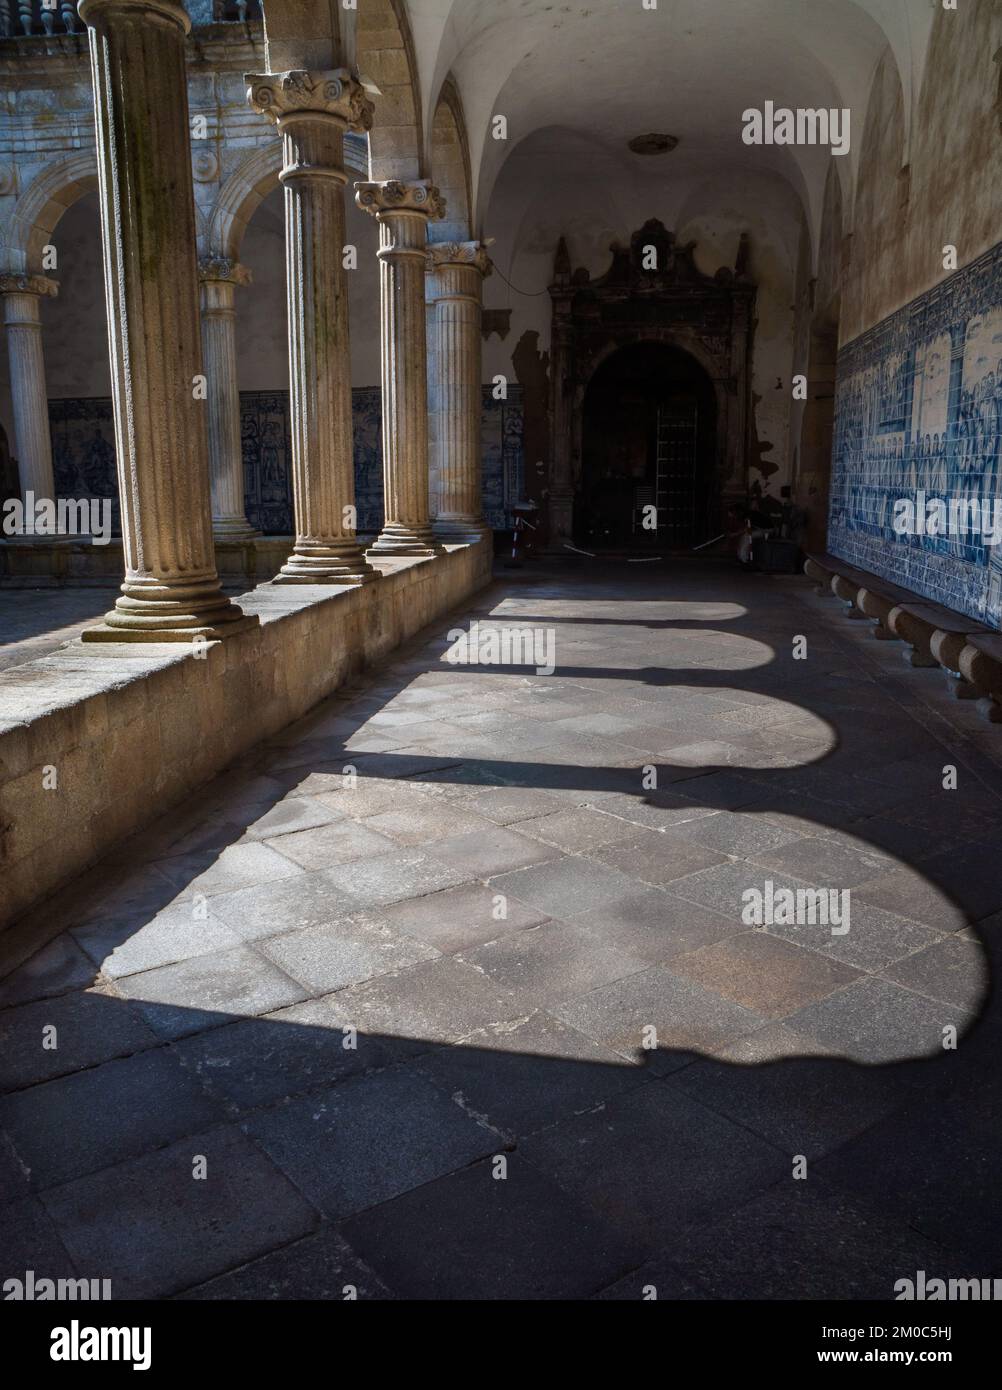 Ornate medieval arches that generate their own shadow and silhouette. Behind the cloister and the blue tile panels that cover the walls of the cloiste Stock Photo